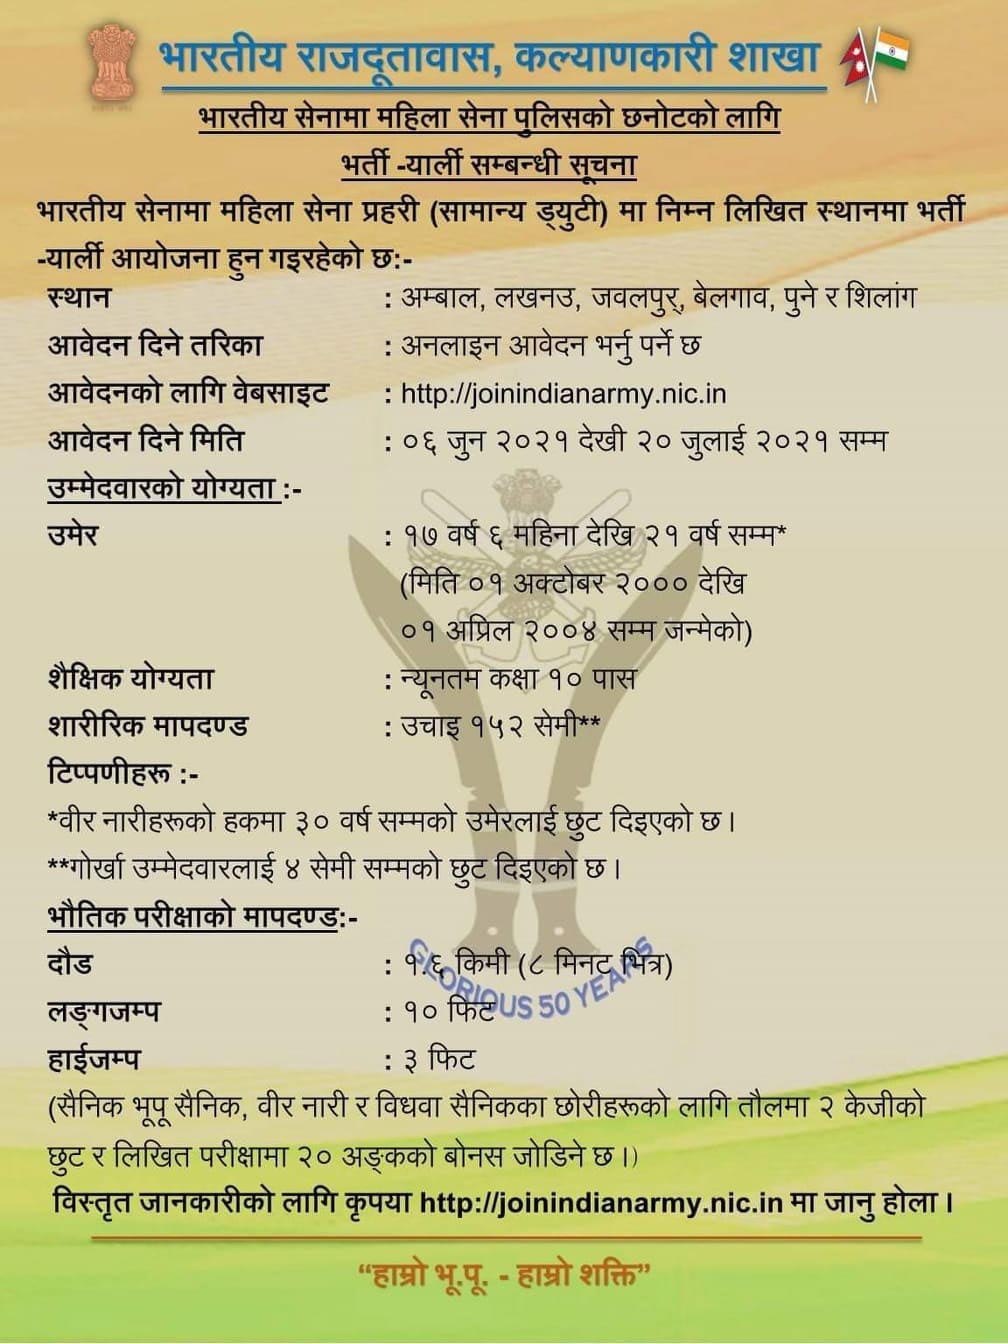 Indian Army Open Recruitment (Bharti) for Nepali